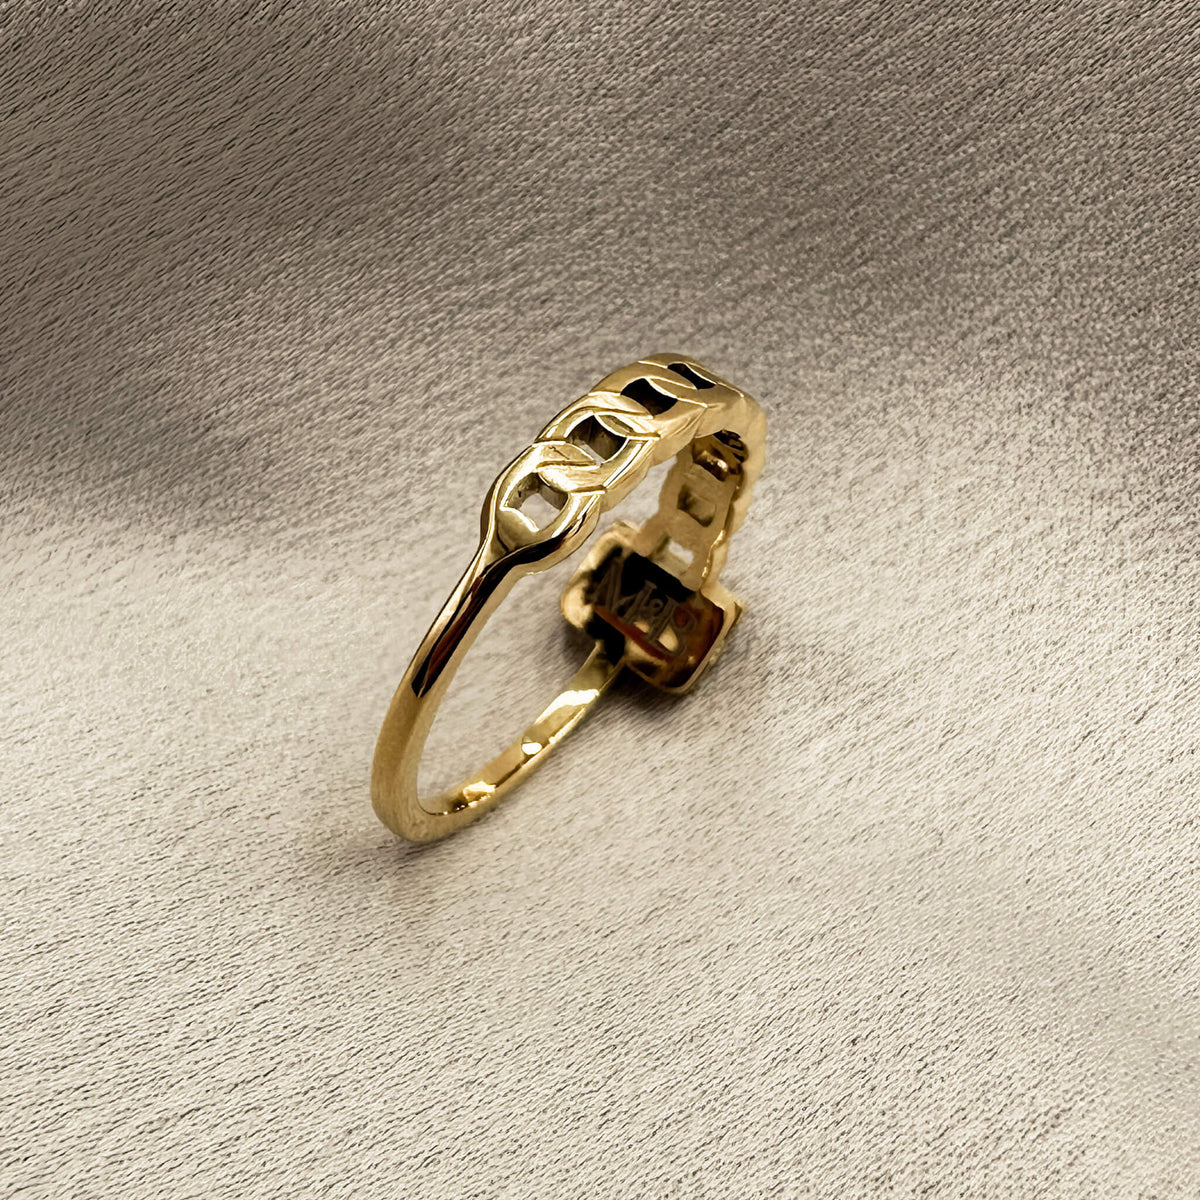 really unique gold ring with a black stud and a textured band on one size and a smooth and traditional band on the other. 